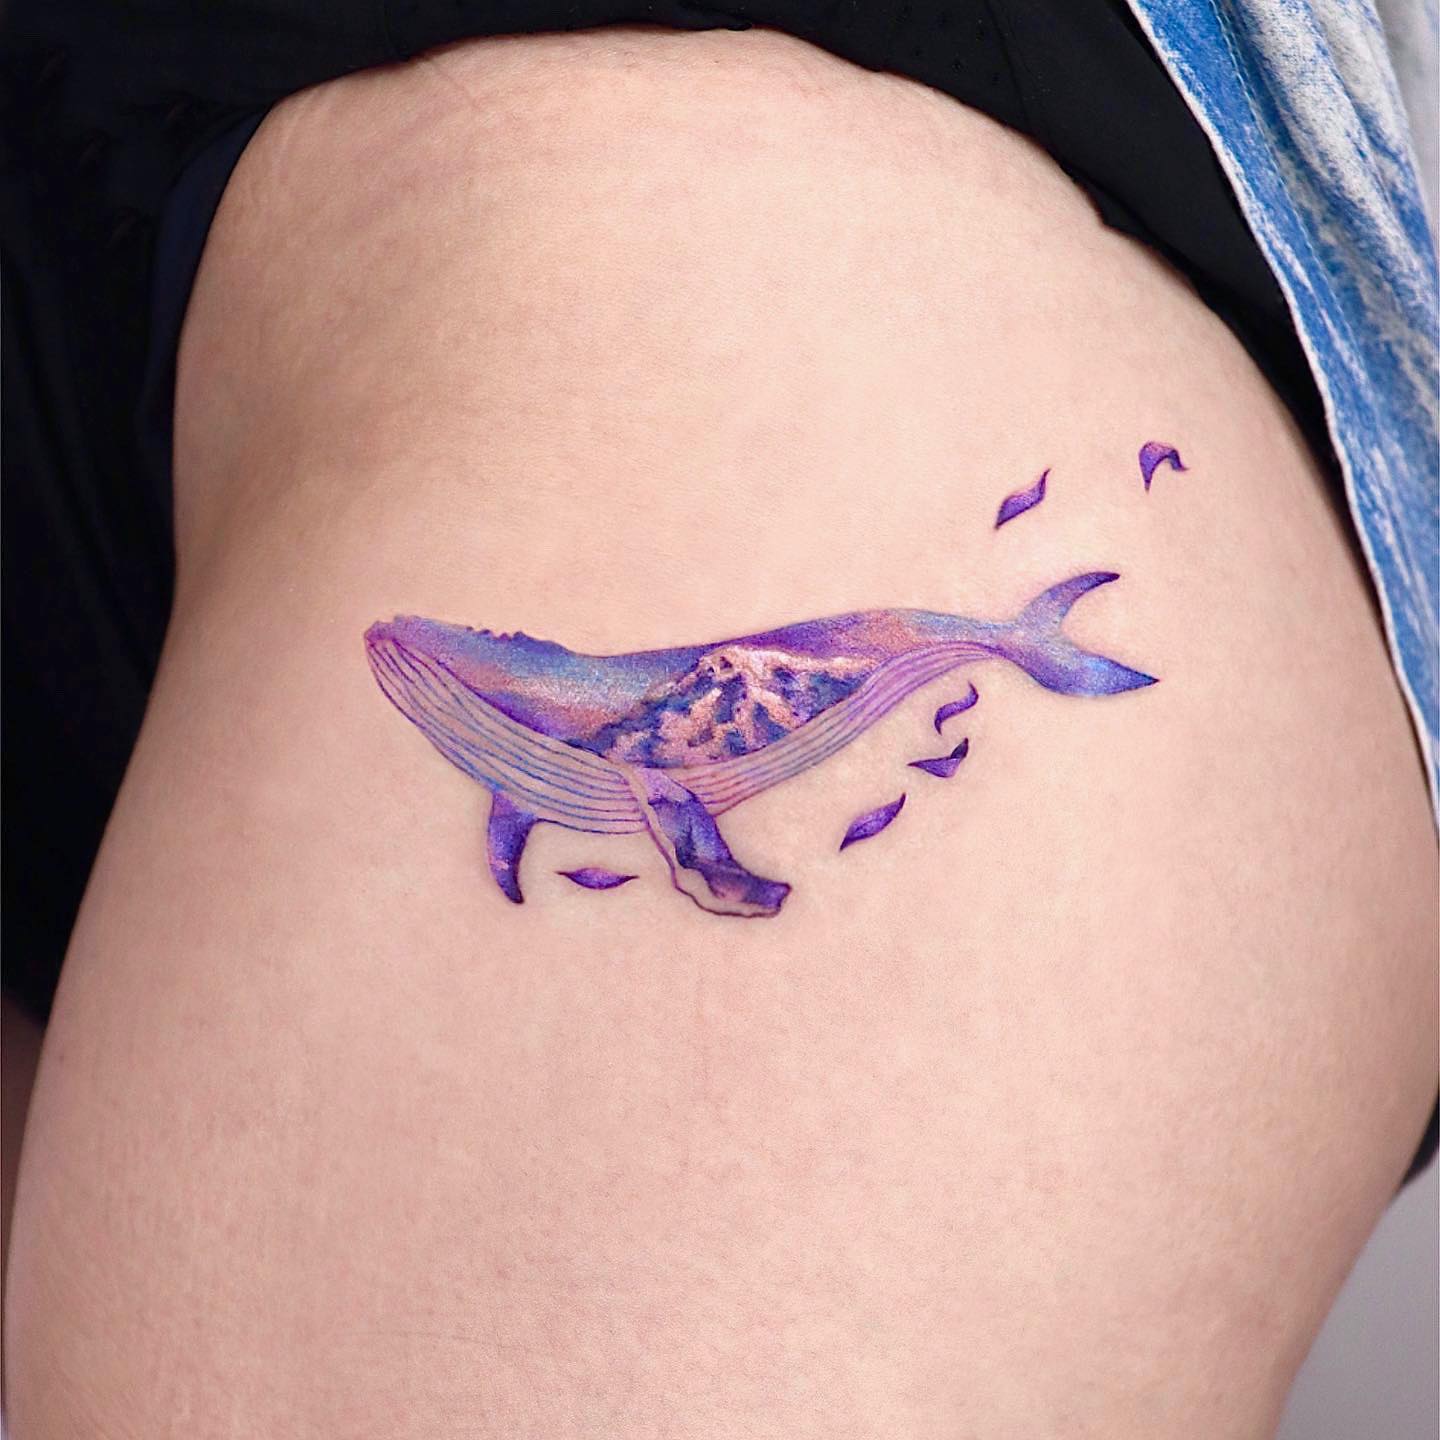 Small and cute, this purple whale tattoo on the hip is for women who like minimalism. Show that you’re all about wildlife with this cute little cheerful piece.